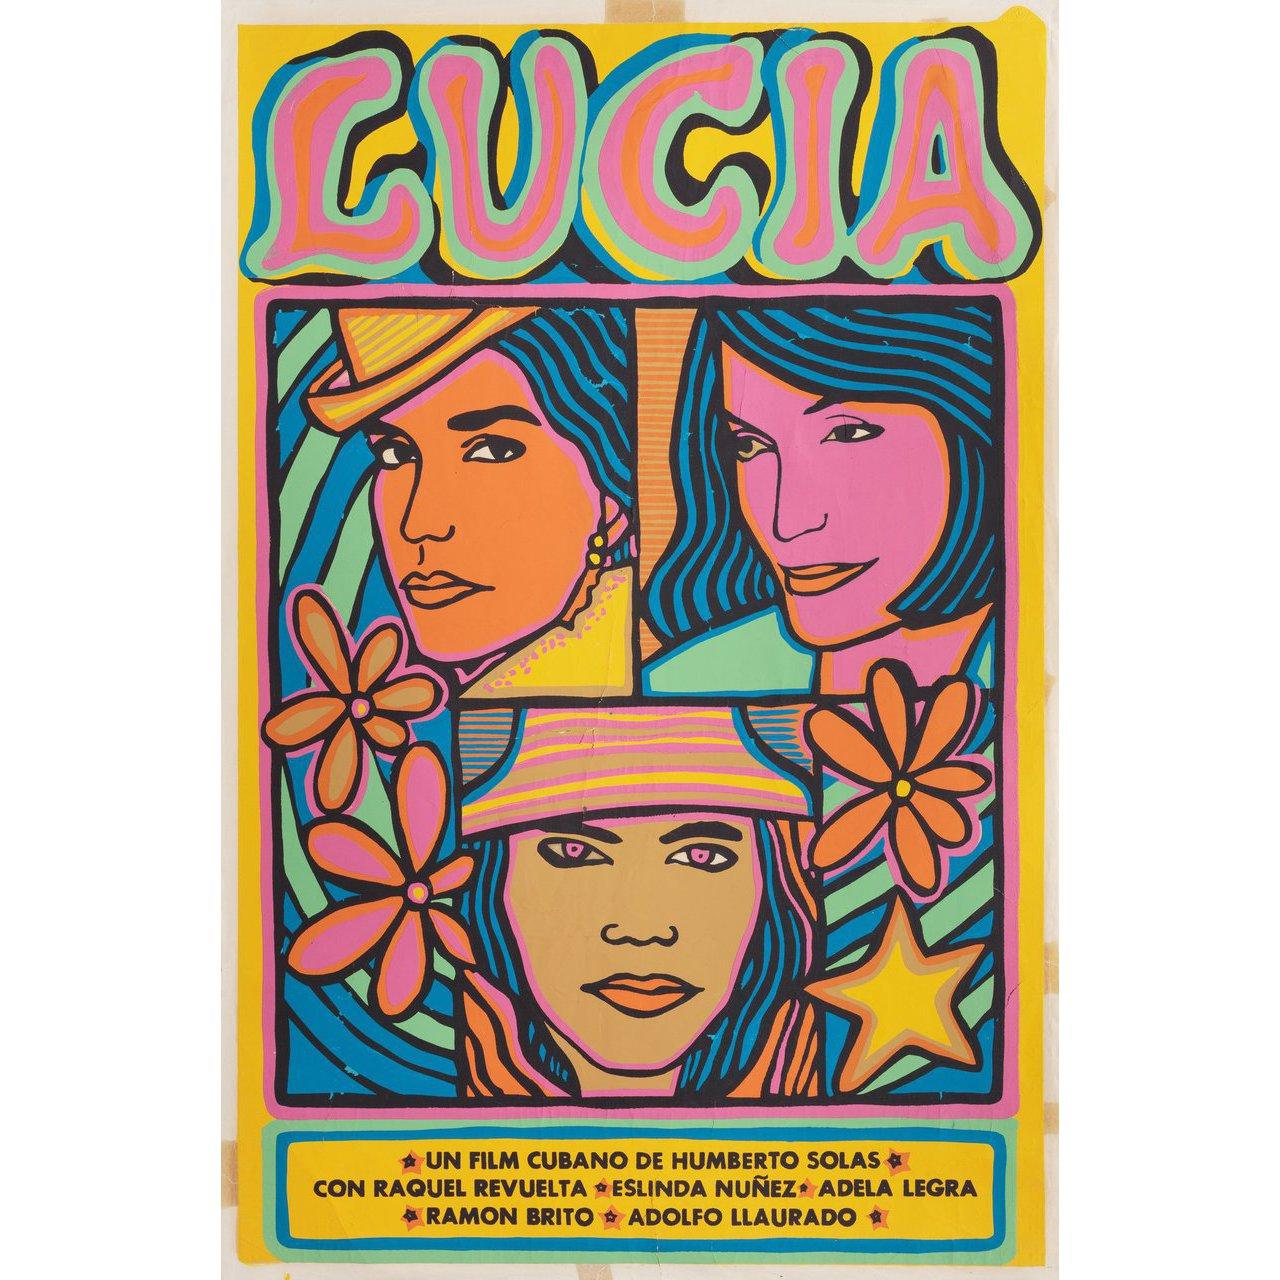 Original 1968 Cuban poster for the film Lucia directed by Humberto Solas with Raquel Revuelta / Eslinda Nunez / Adela Legra / Eduardo Moure. Very Good condition, rolled with tape stains. Please note: the size is stated in inches and the actual size